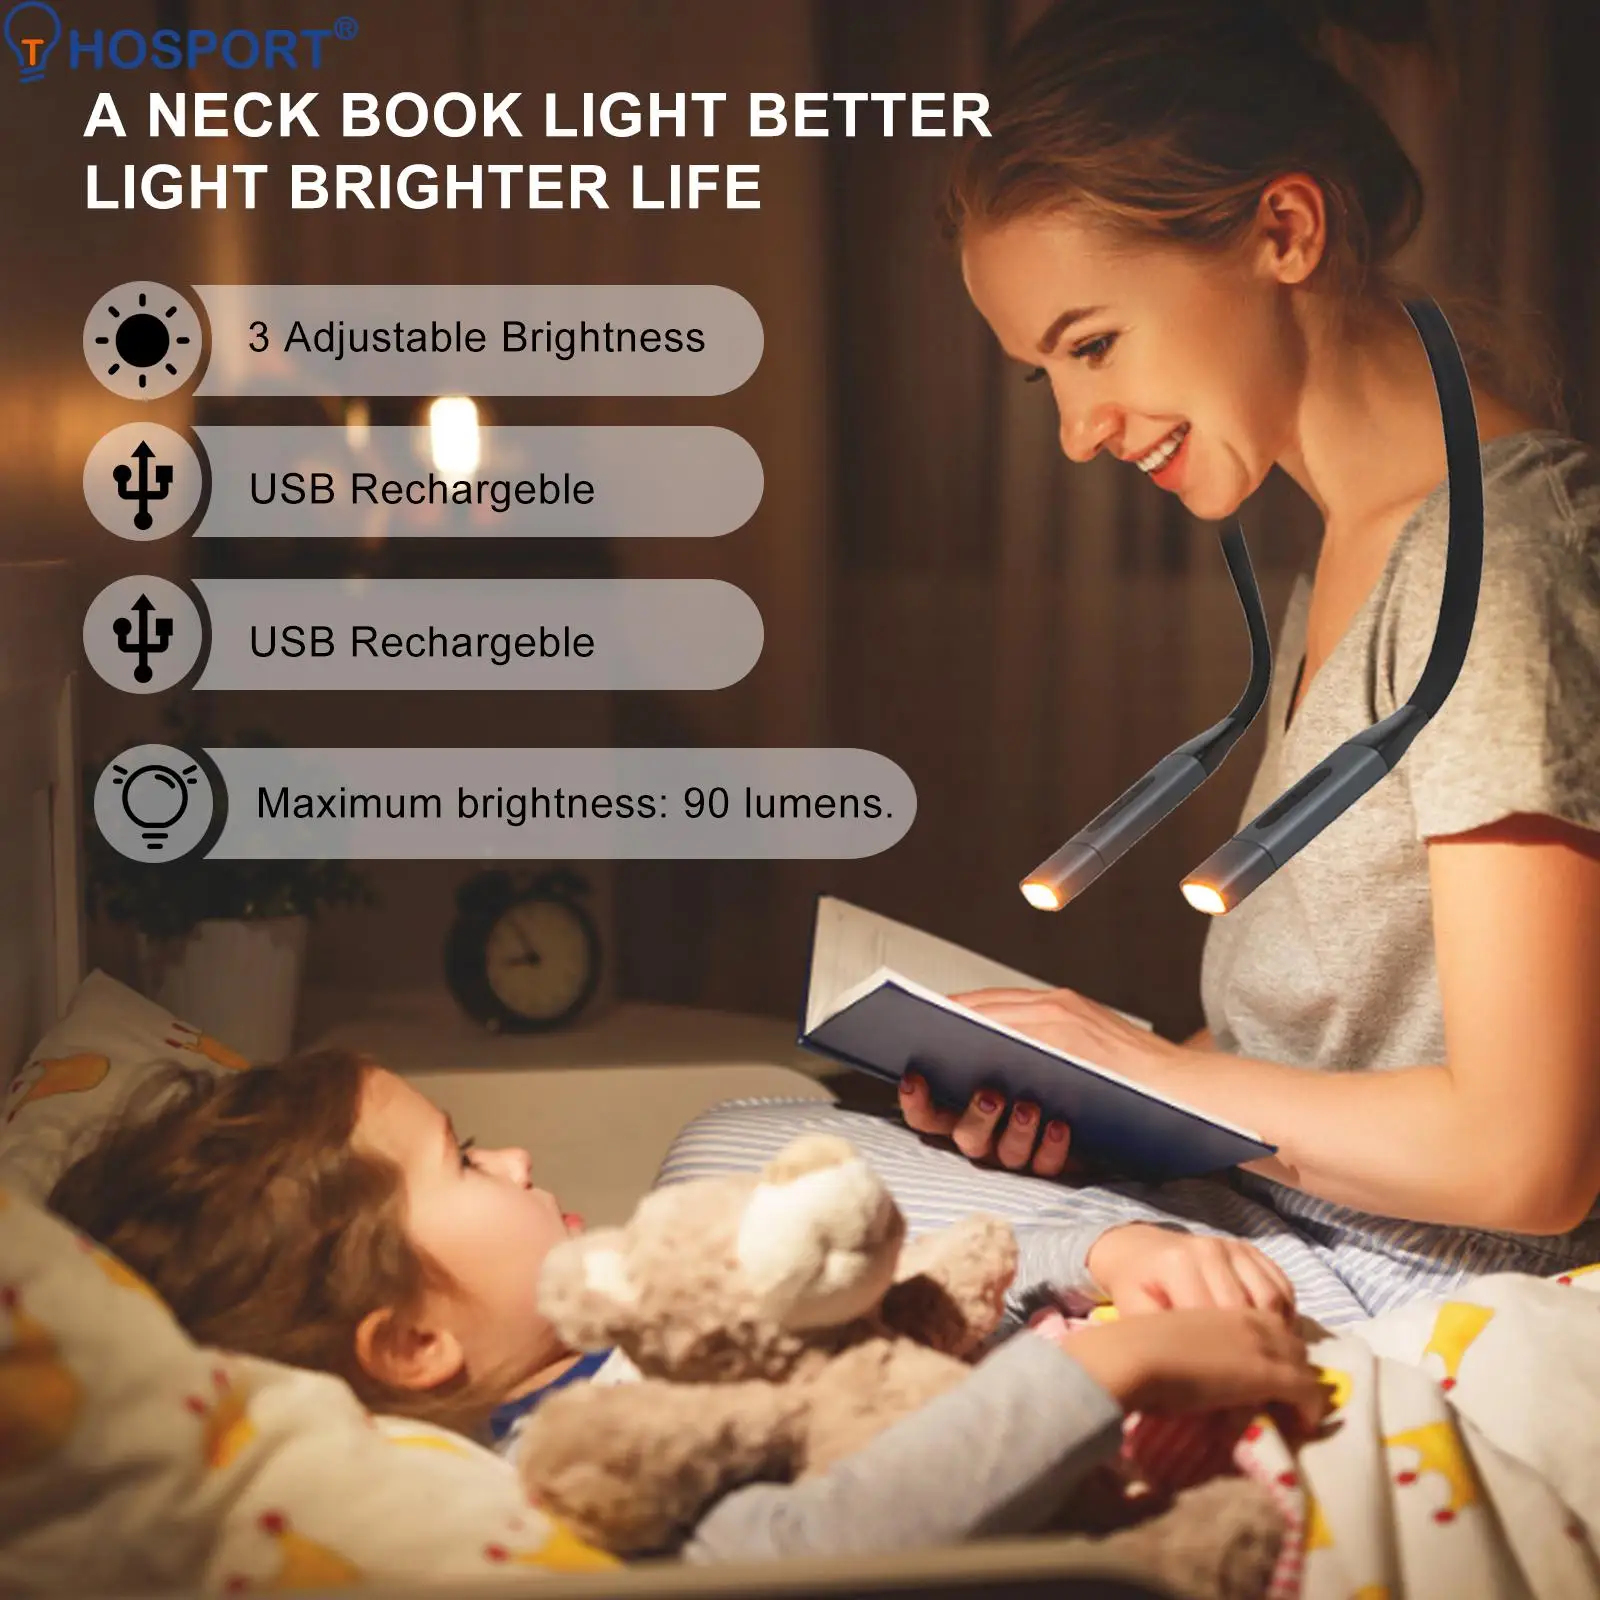 Led-neck Reading Lamp, Book Light For Reading In Bed, 3 Colors, 6  Brightness Levels, Flexible Arms, Rechargeable, Durable, Perfect For Reading,  Knitti